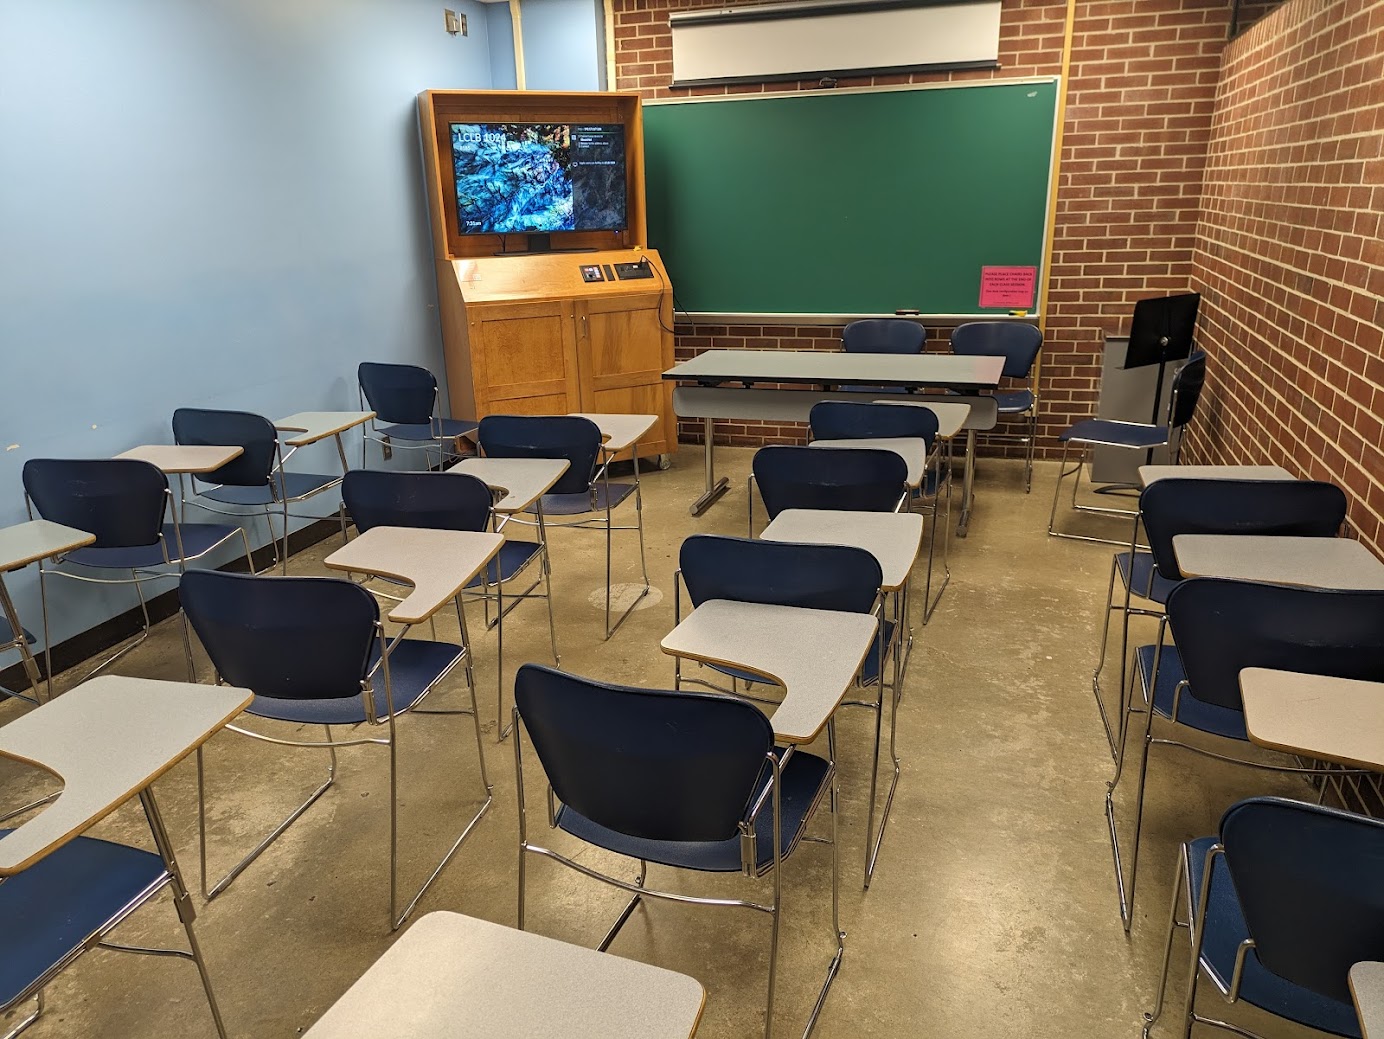 A view of the classroom with moveable tableted arm chairs, chalkboard, and instructor table in front.